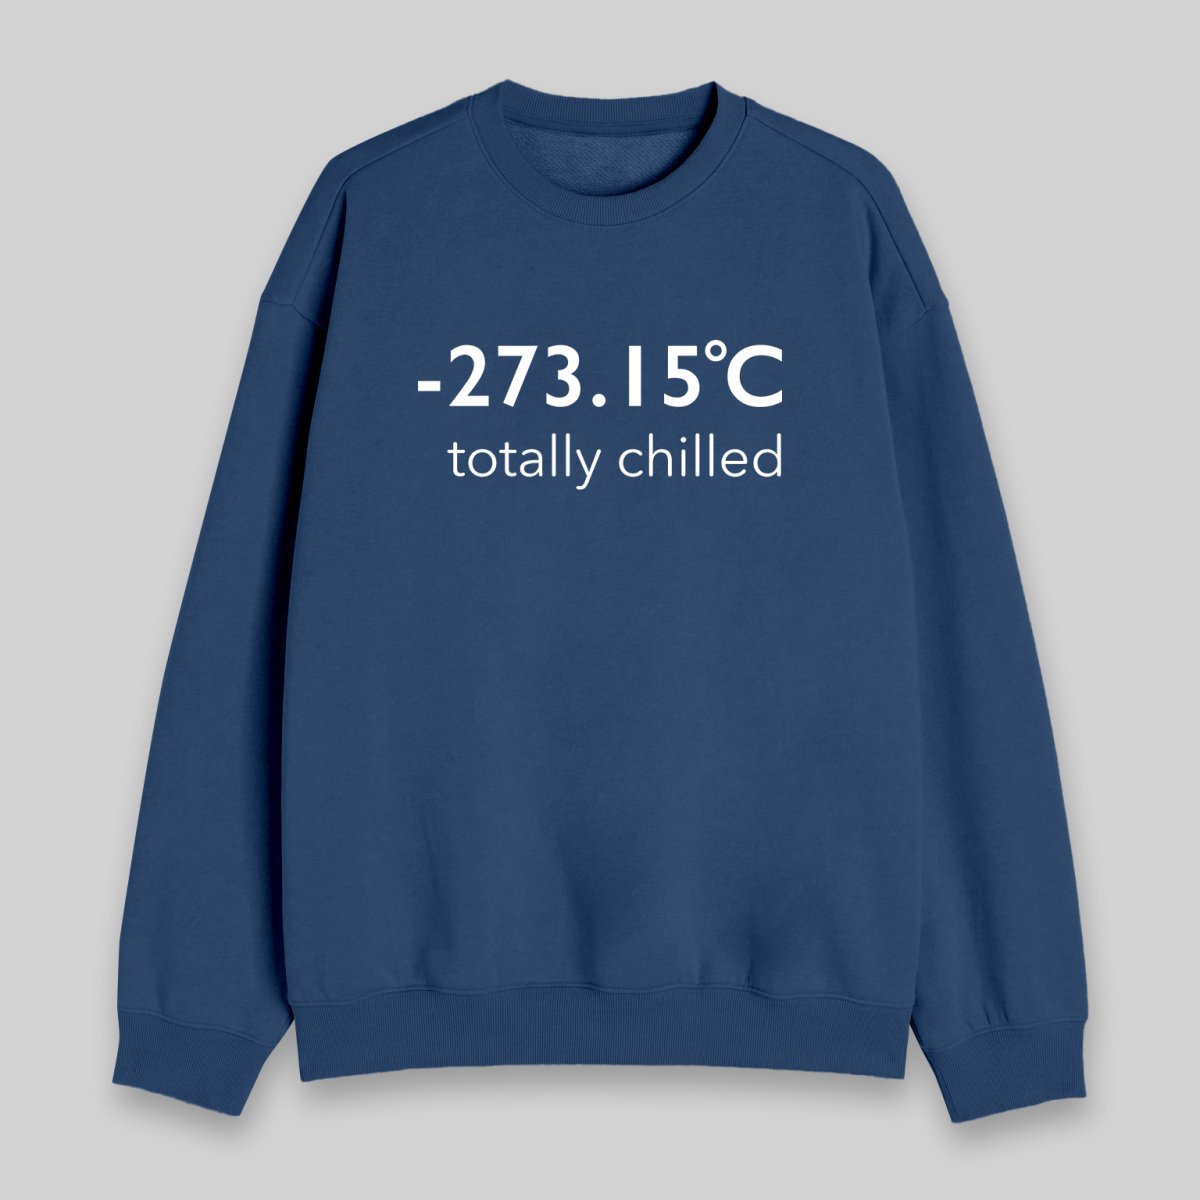 Totally Chilled Sweatshirt - Geeksoutfit